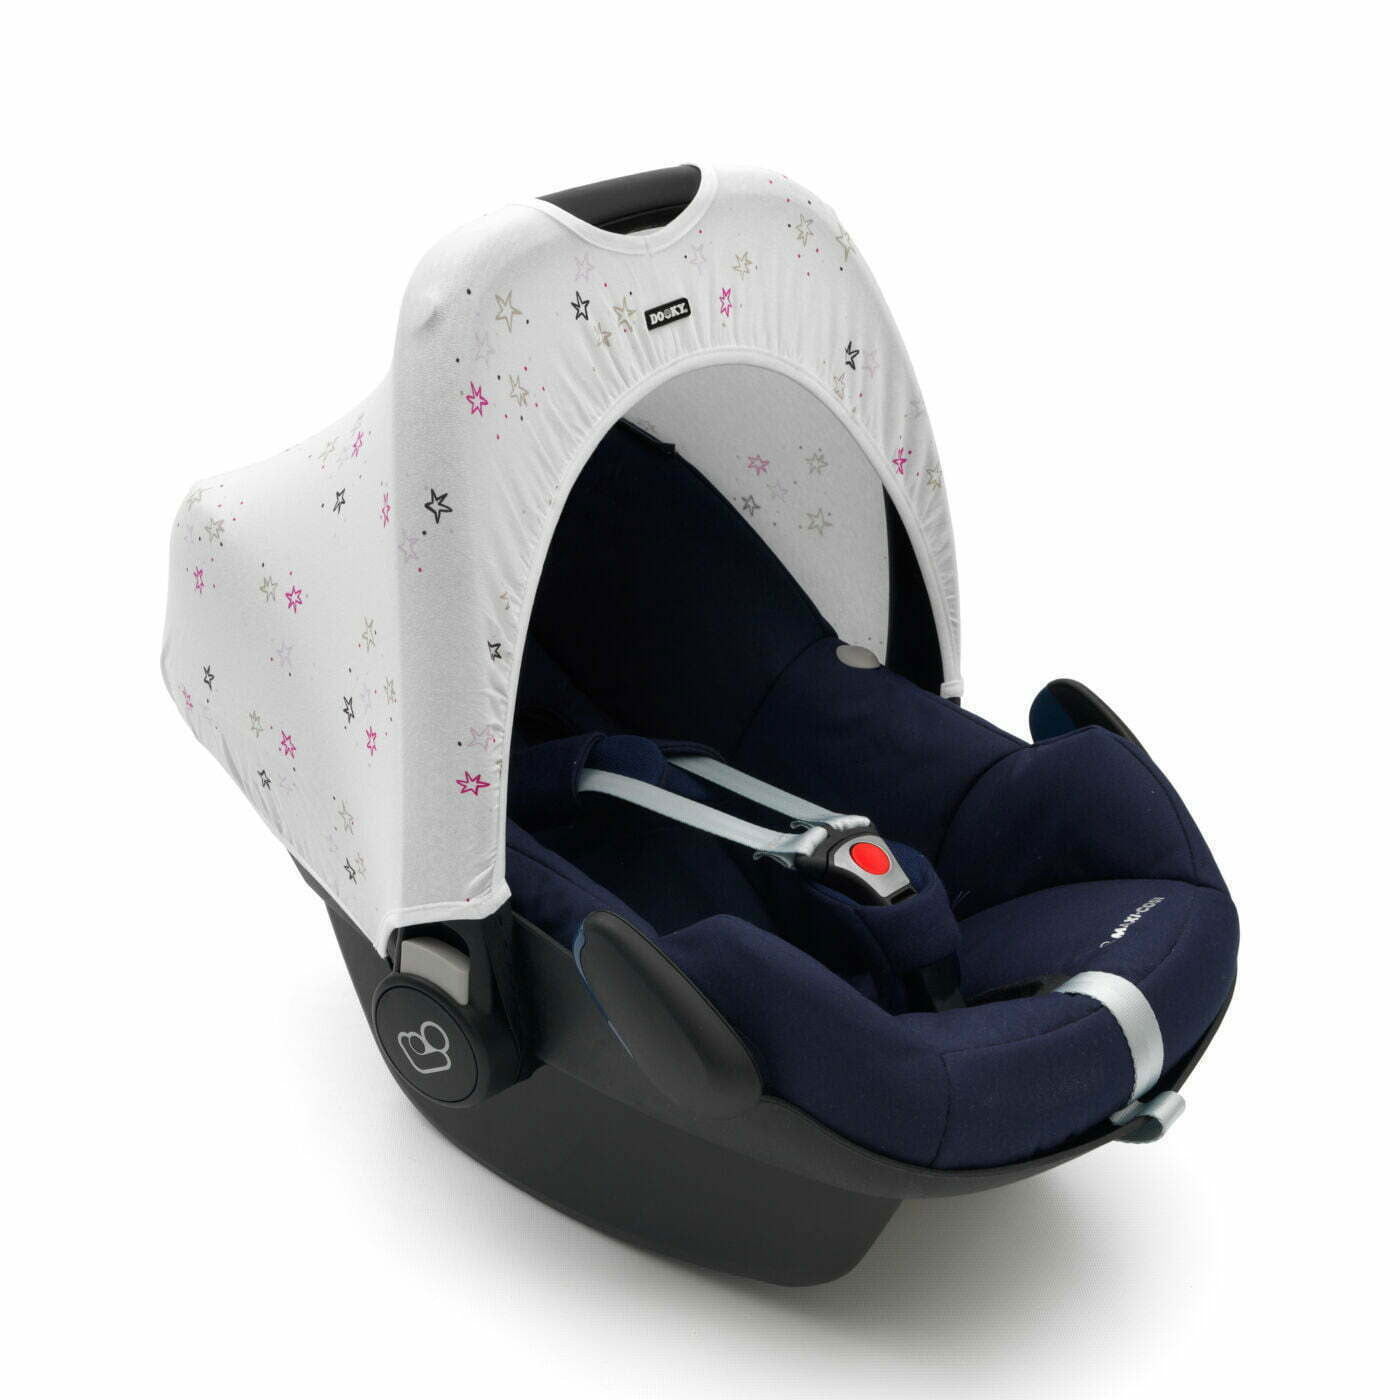 The Dooky Car Seat Hoody protects your little one from UV, wind, light, cold, noise and light rain – whilst making your car seat and travel system look great!